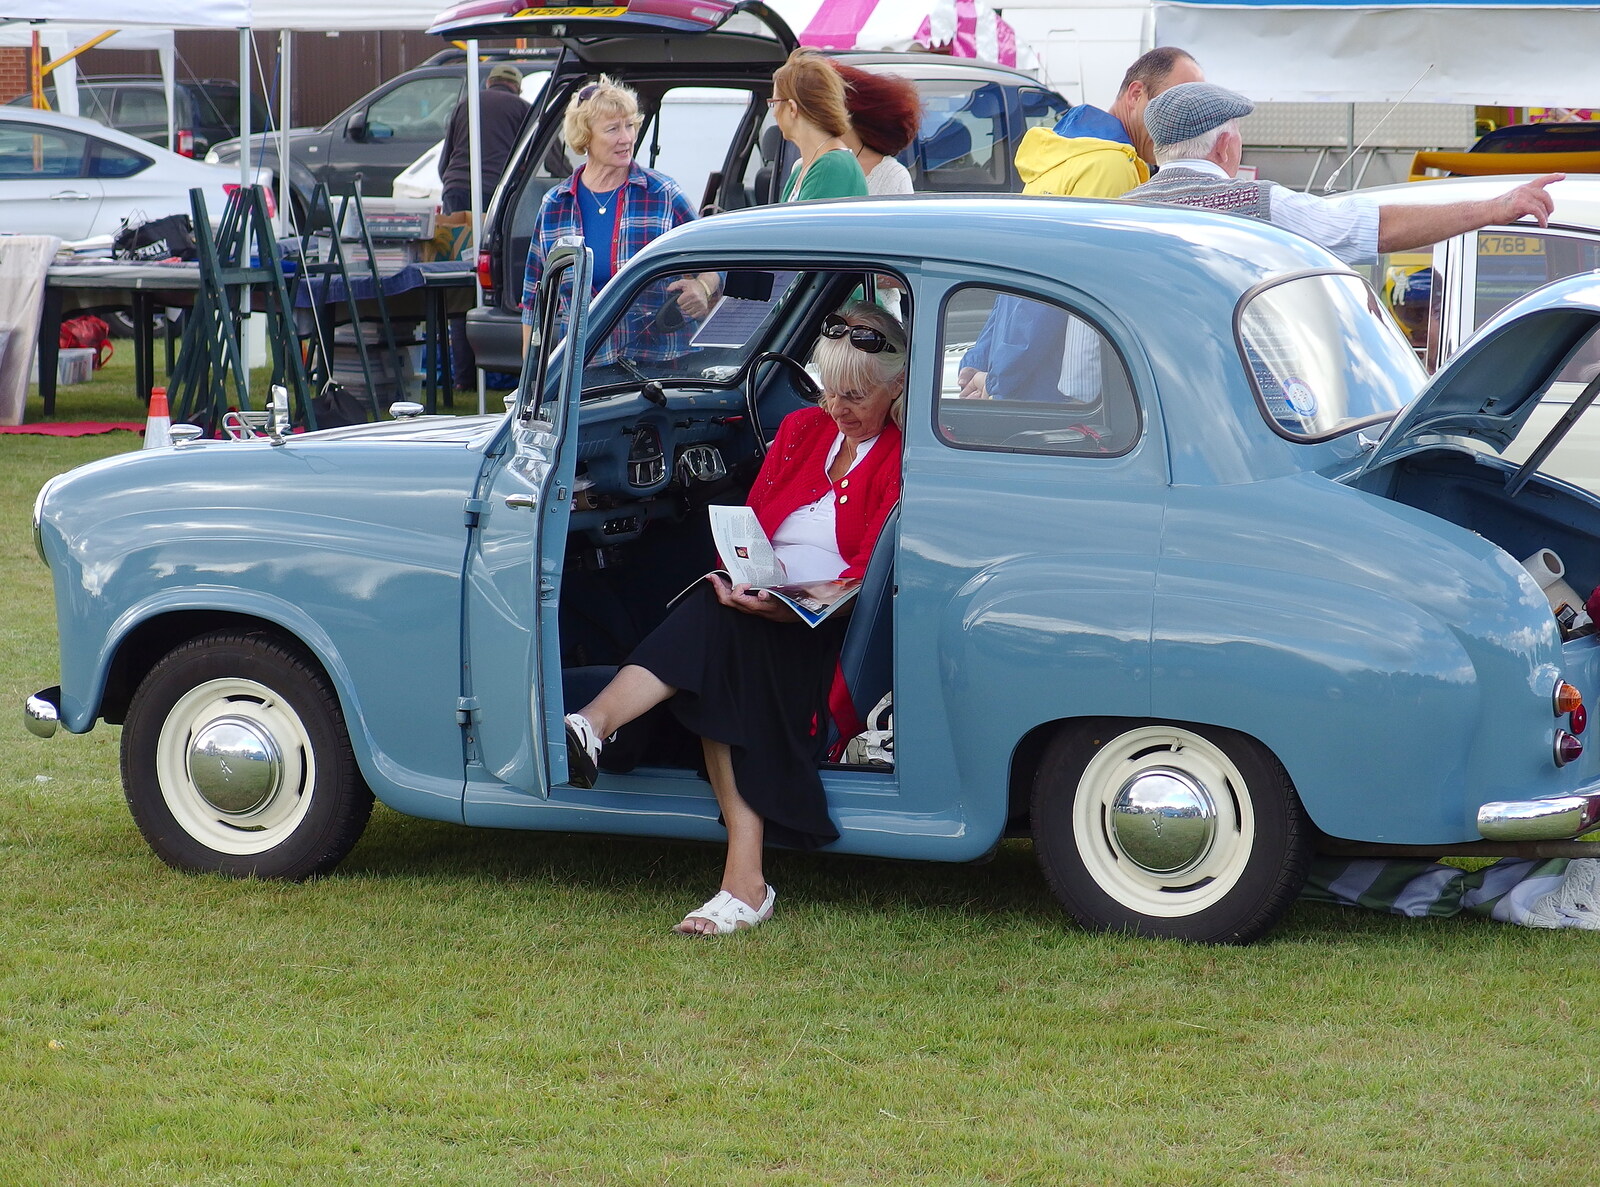 Taking it easy in another A35 from Stradbroke Classic Car Show, Stradbroke, Suffolk - 7th September 2013